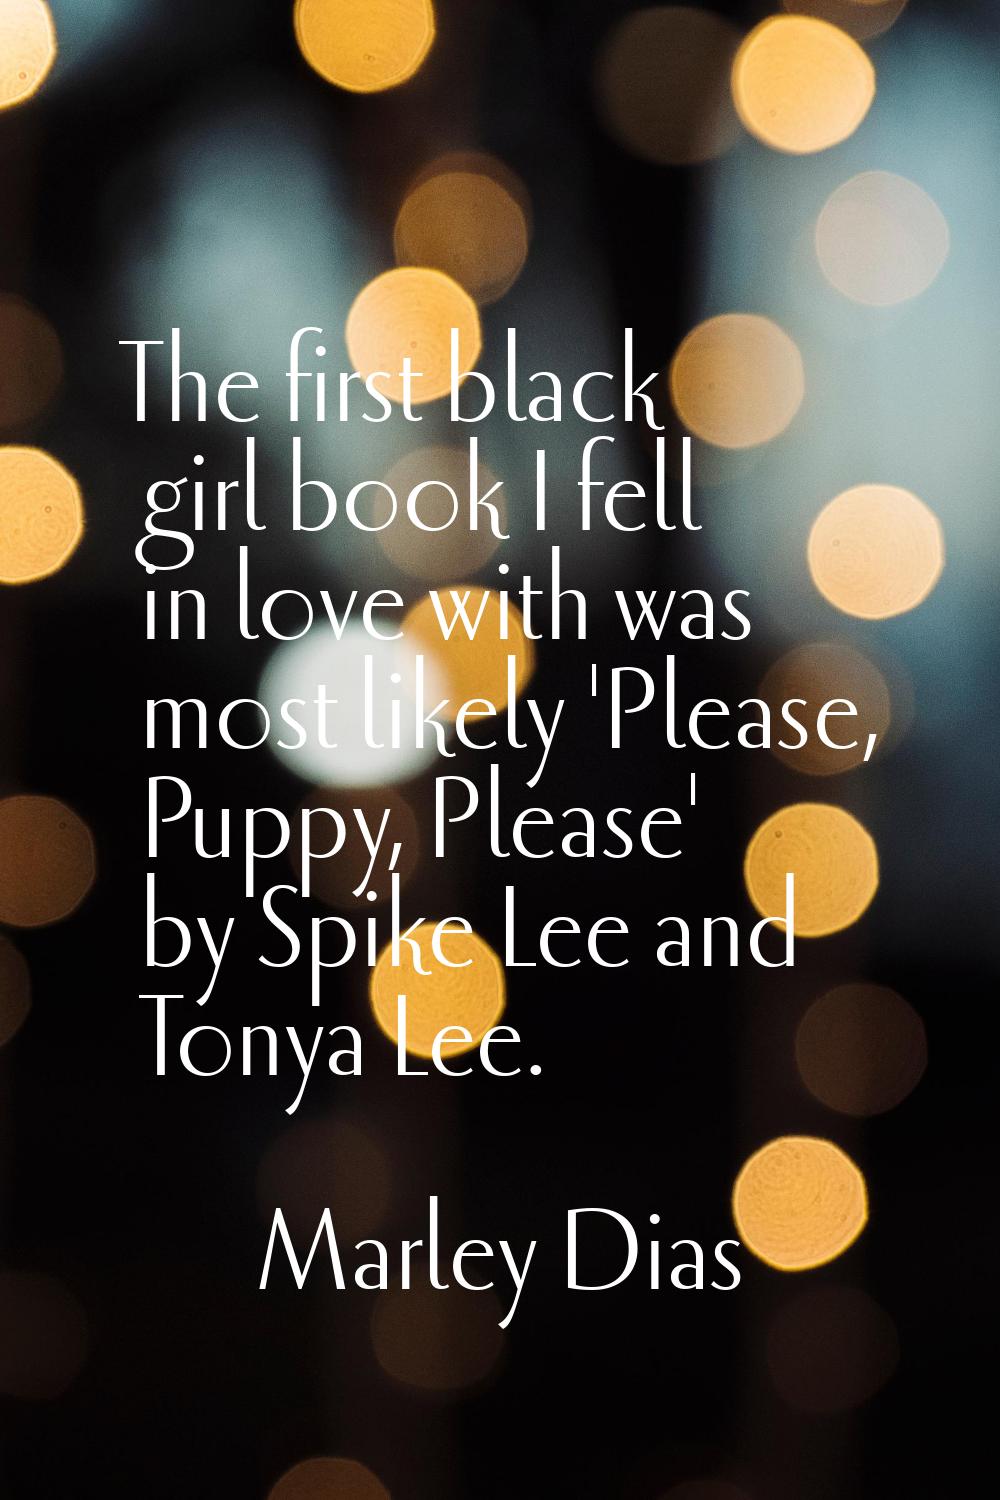 The first black girl book I fell in love with was most likely 'Please, Puppy, Please' by Spike Lee 